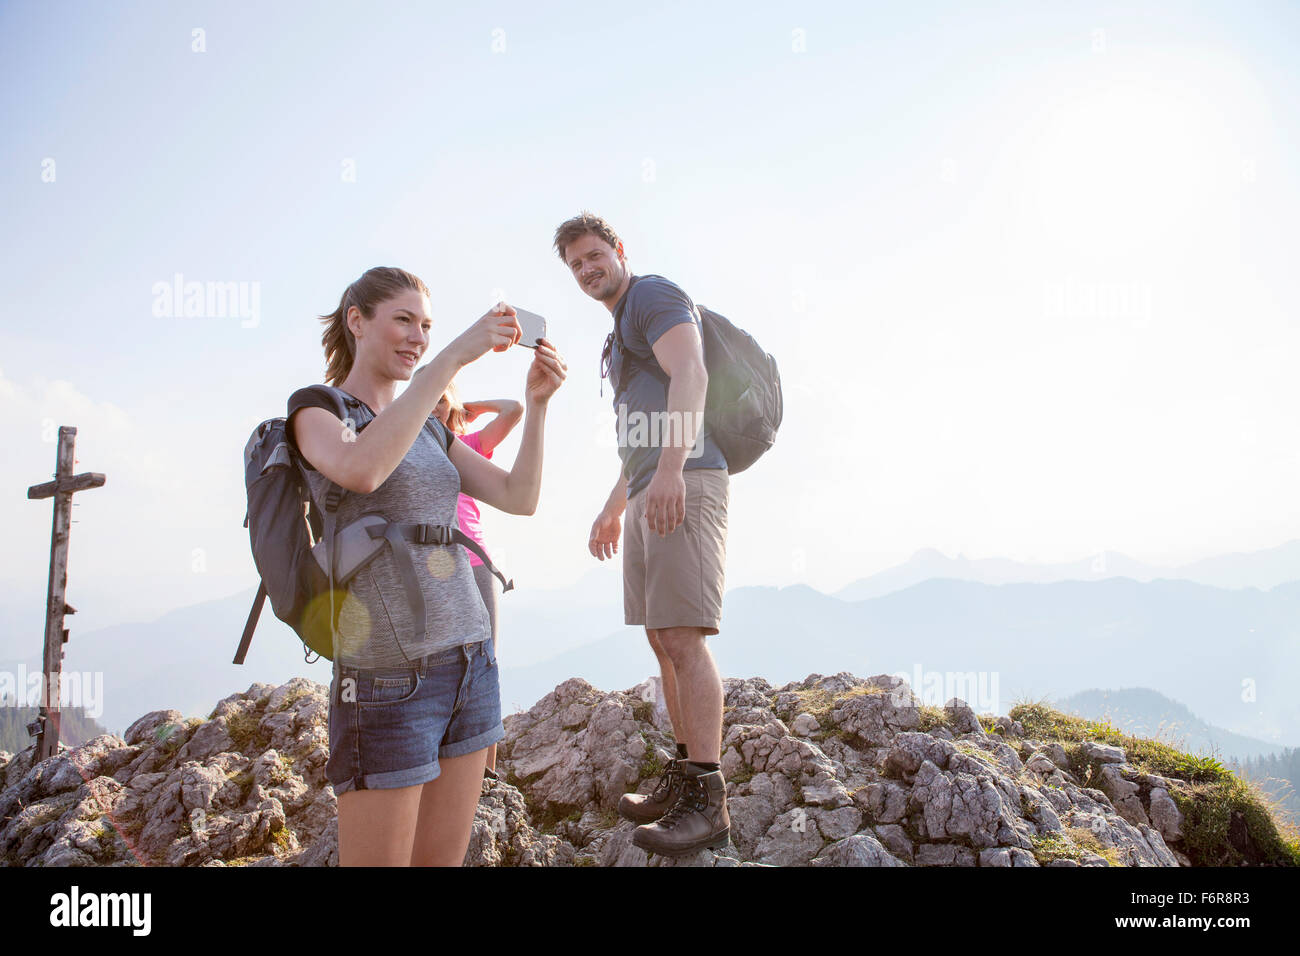 Group of friends taking pictures in mountain landscape Stock Photo